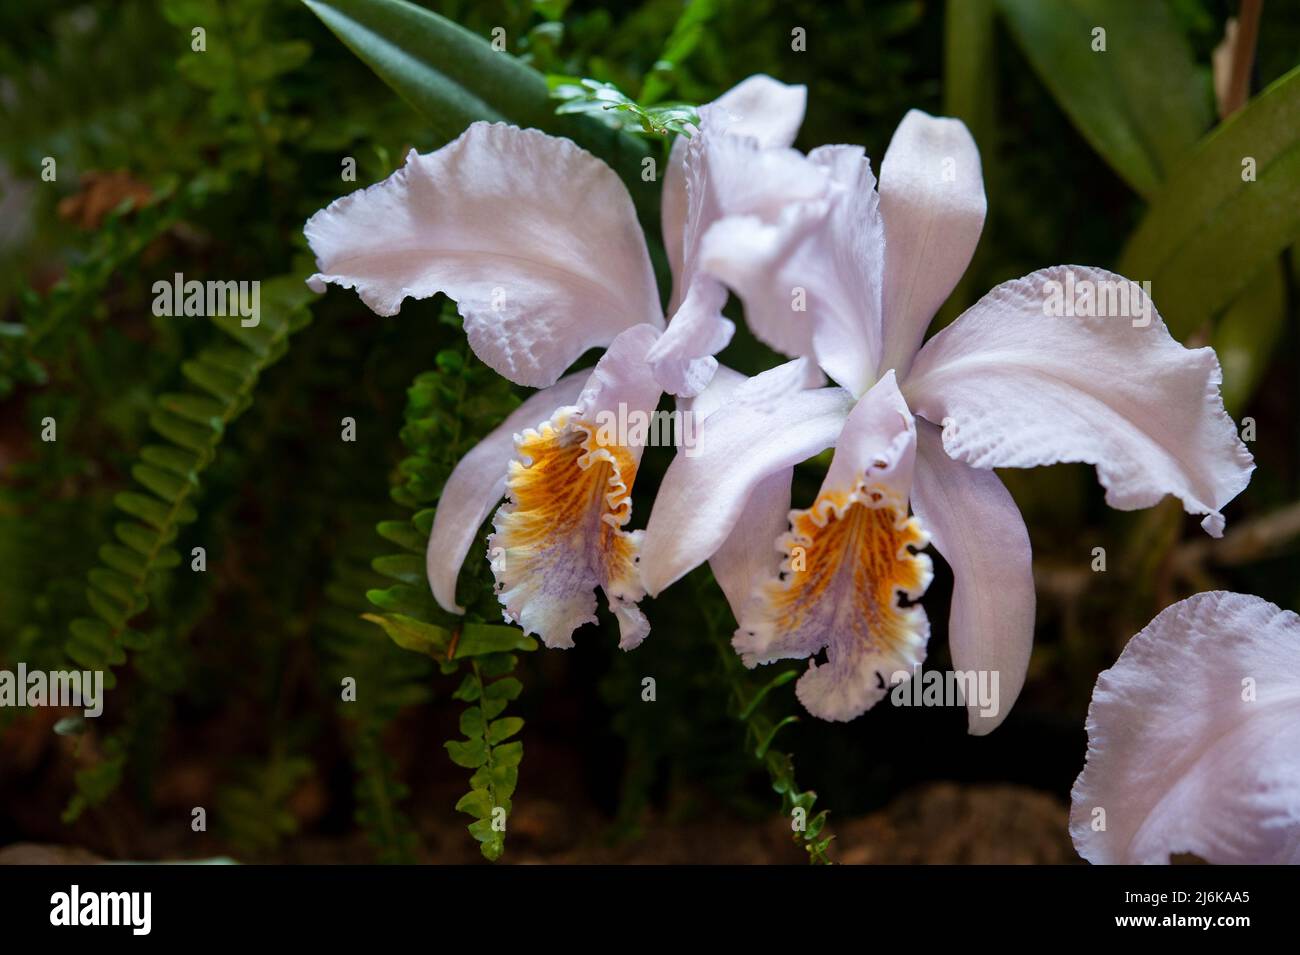 Cattleya mossiae coerulea is a genus in the orchid family Orchidaceae. Close up. Stock Photo